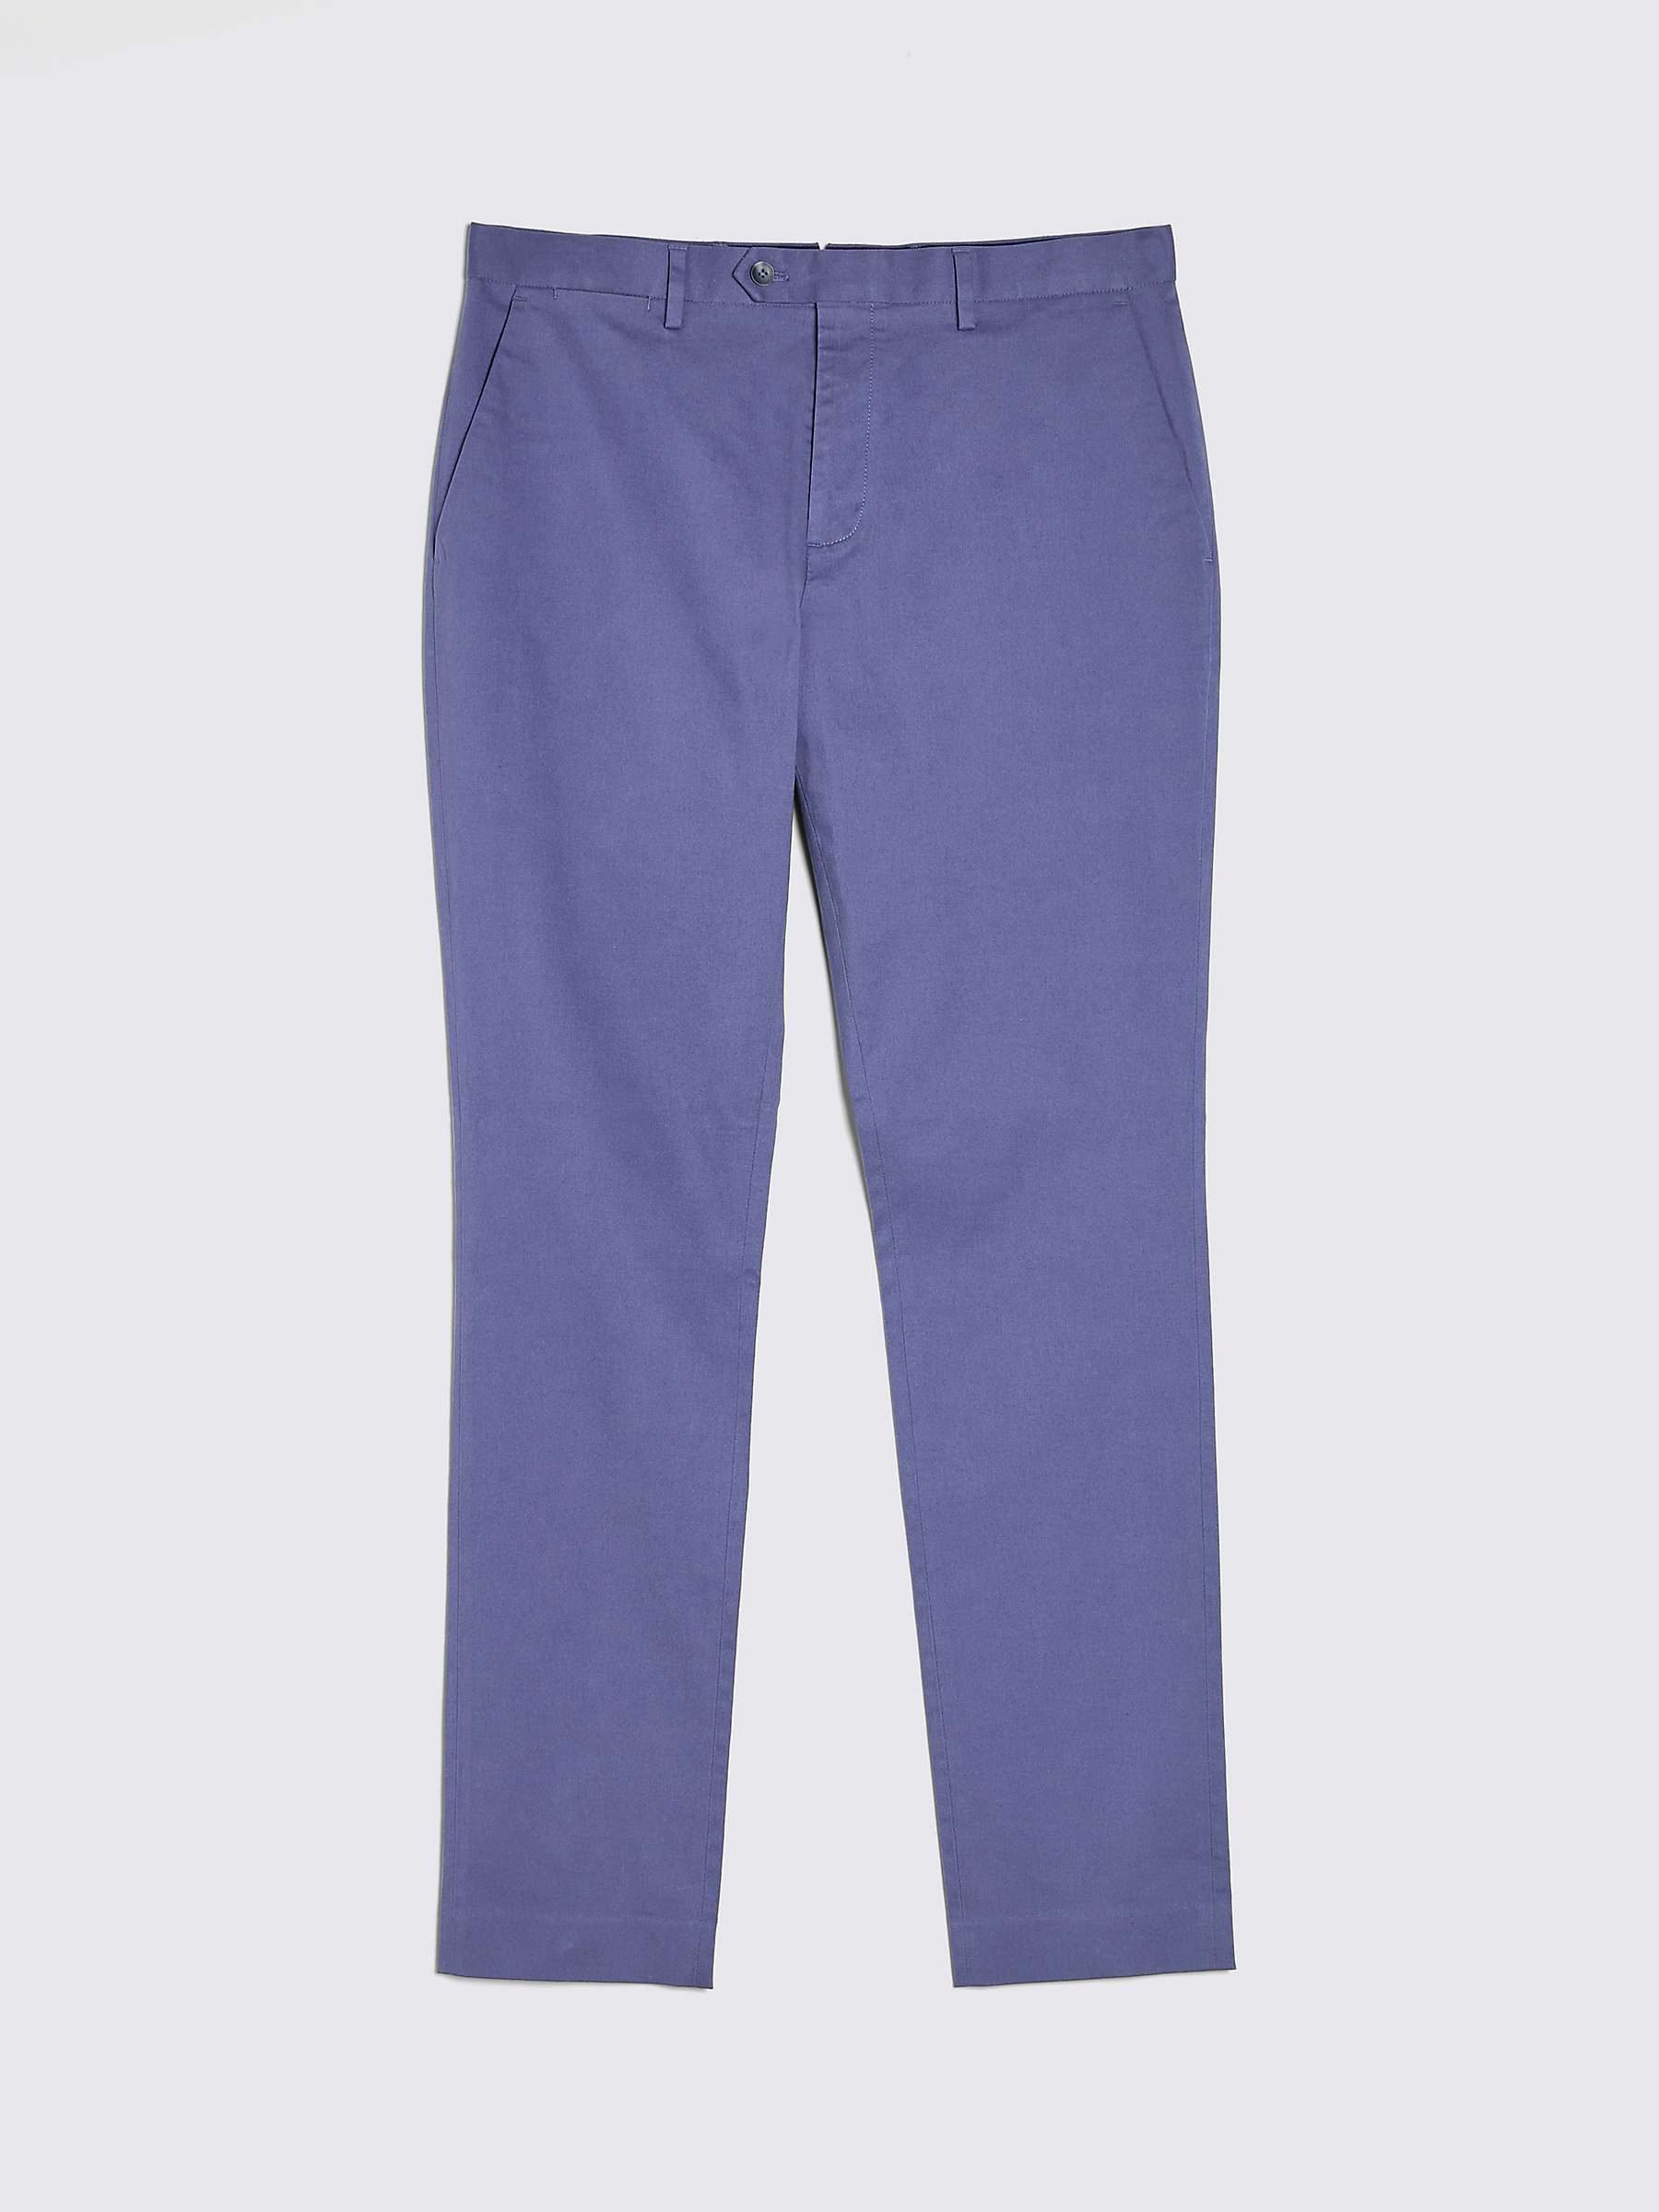 Buy Moss Slim Fit Chinos Online at johnlewis.com